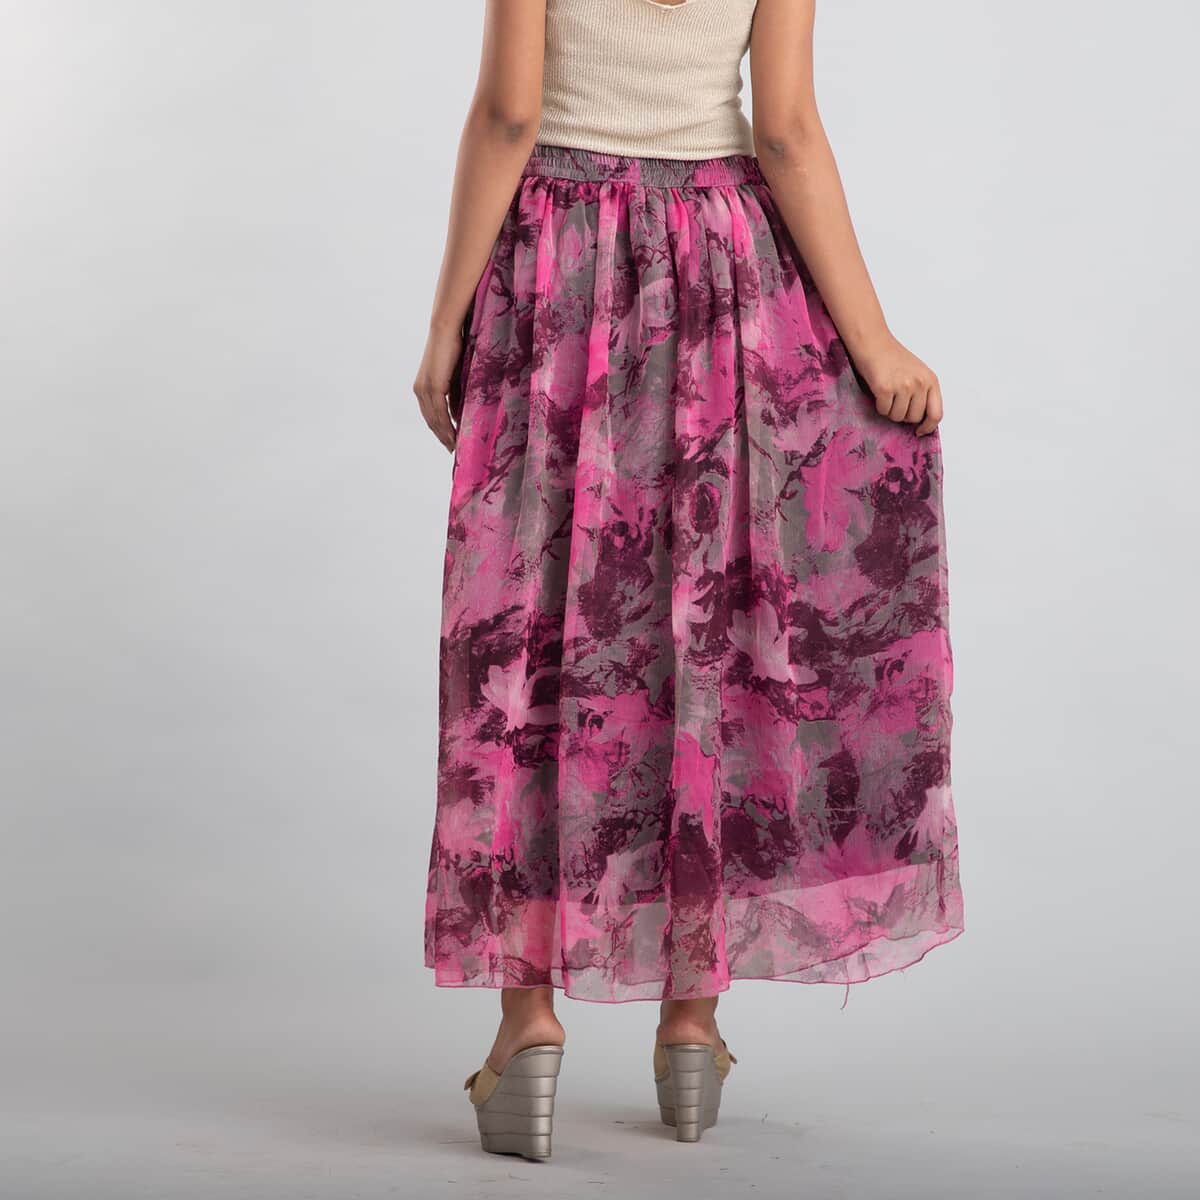 Jovie Light Purple Floral Printed Skirt for Women with Drawstring - One Size Fits Most | Long Skirt | Summer Skirts | Women Skirt image number 1